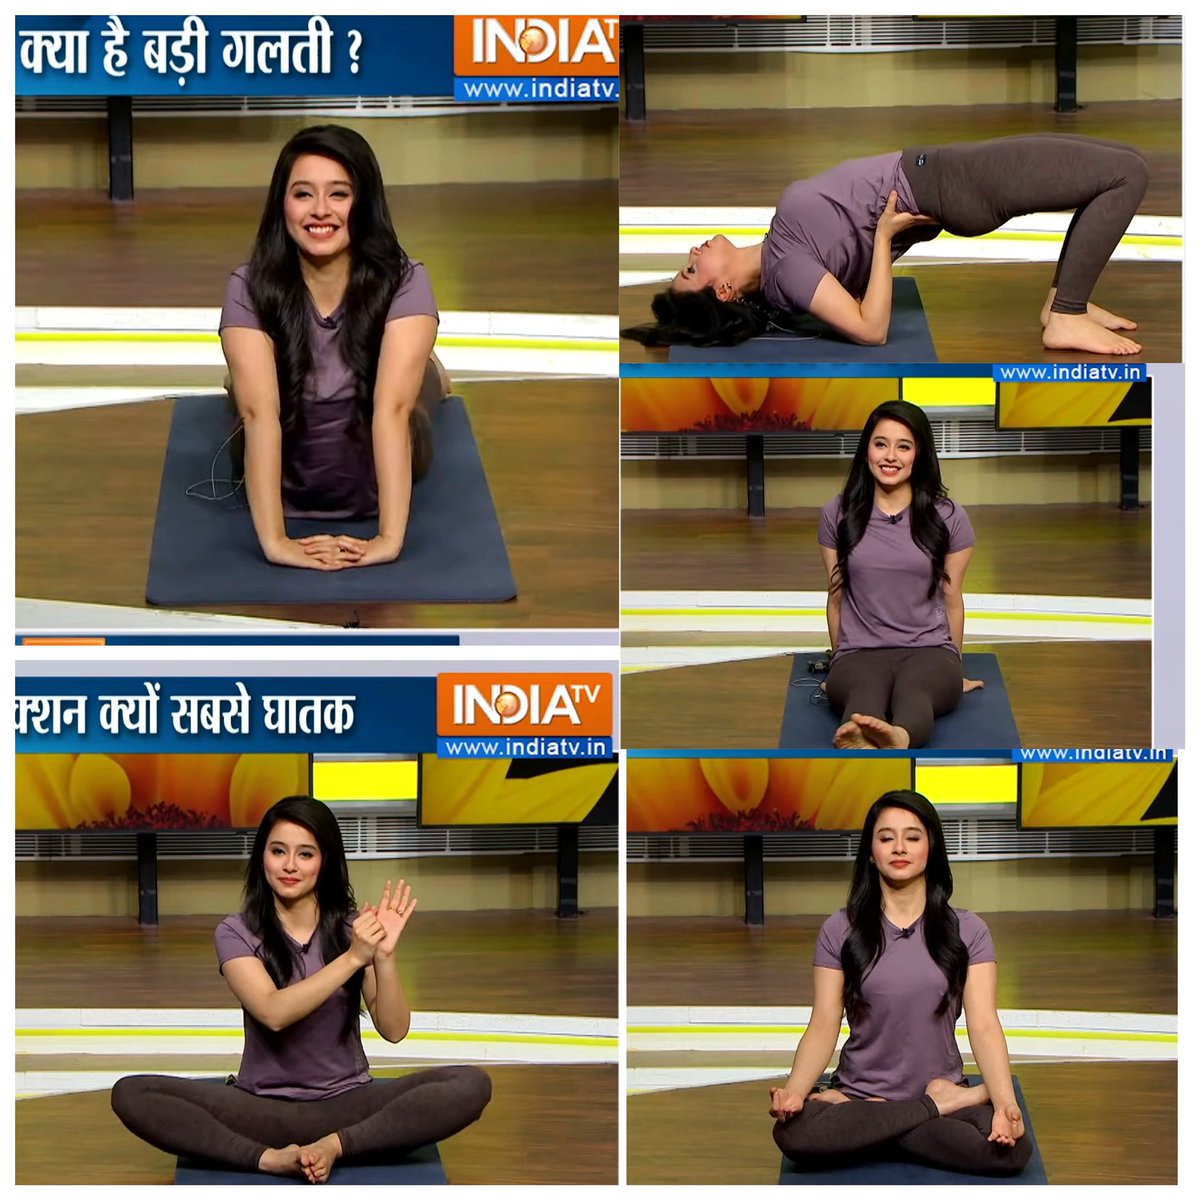 When you commit to your practice, you unlock a world of possibilities. Embrace the change and feel the strength within. #ConsistencyEqualsPower #yogaeveryday #indiatv #yoga